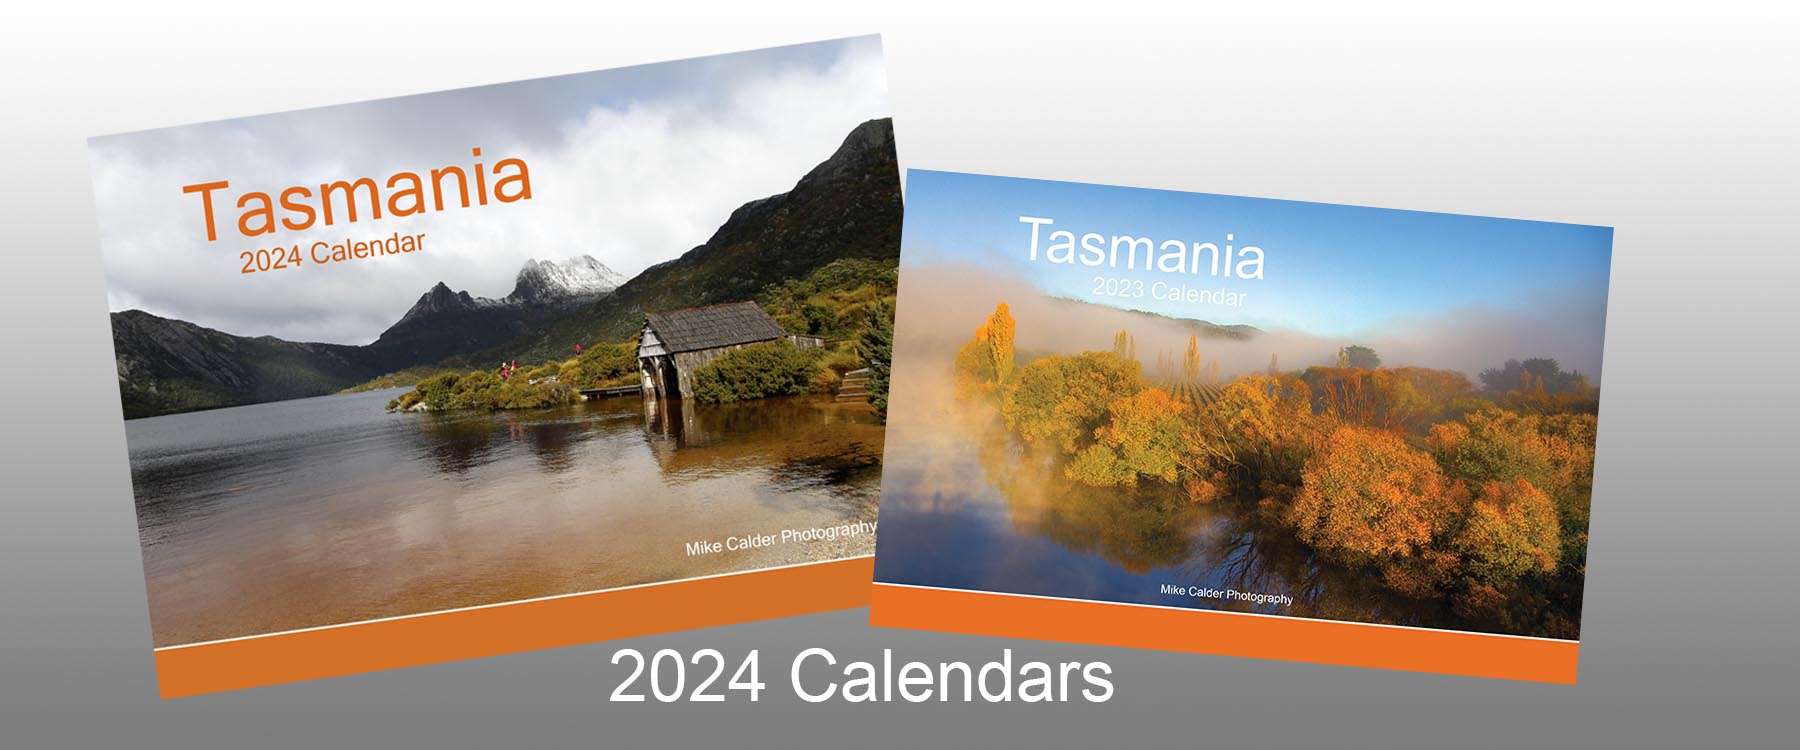 2024 calendars with background jpeg